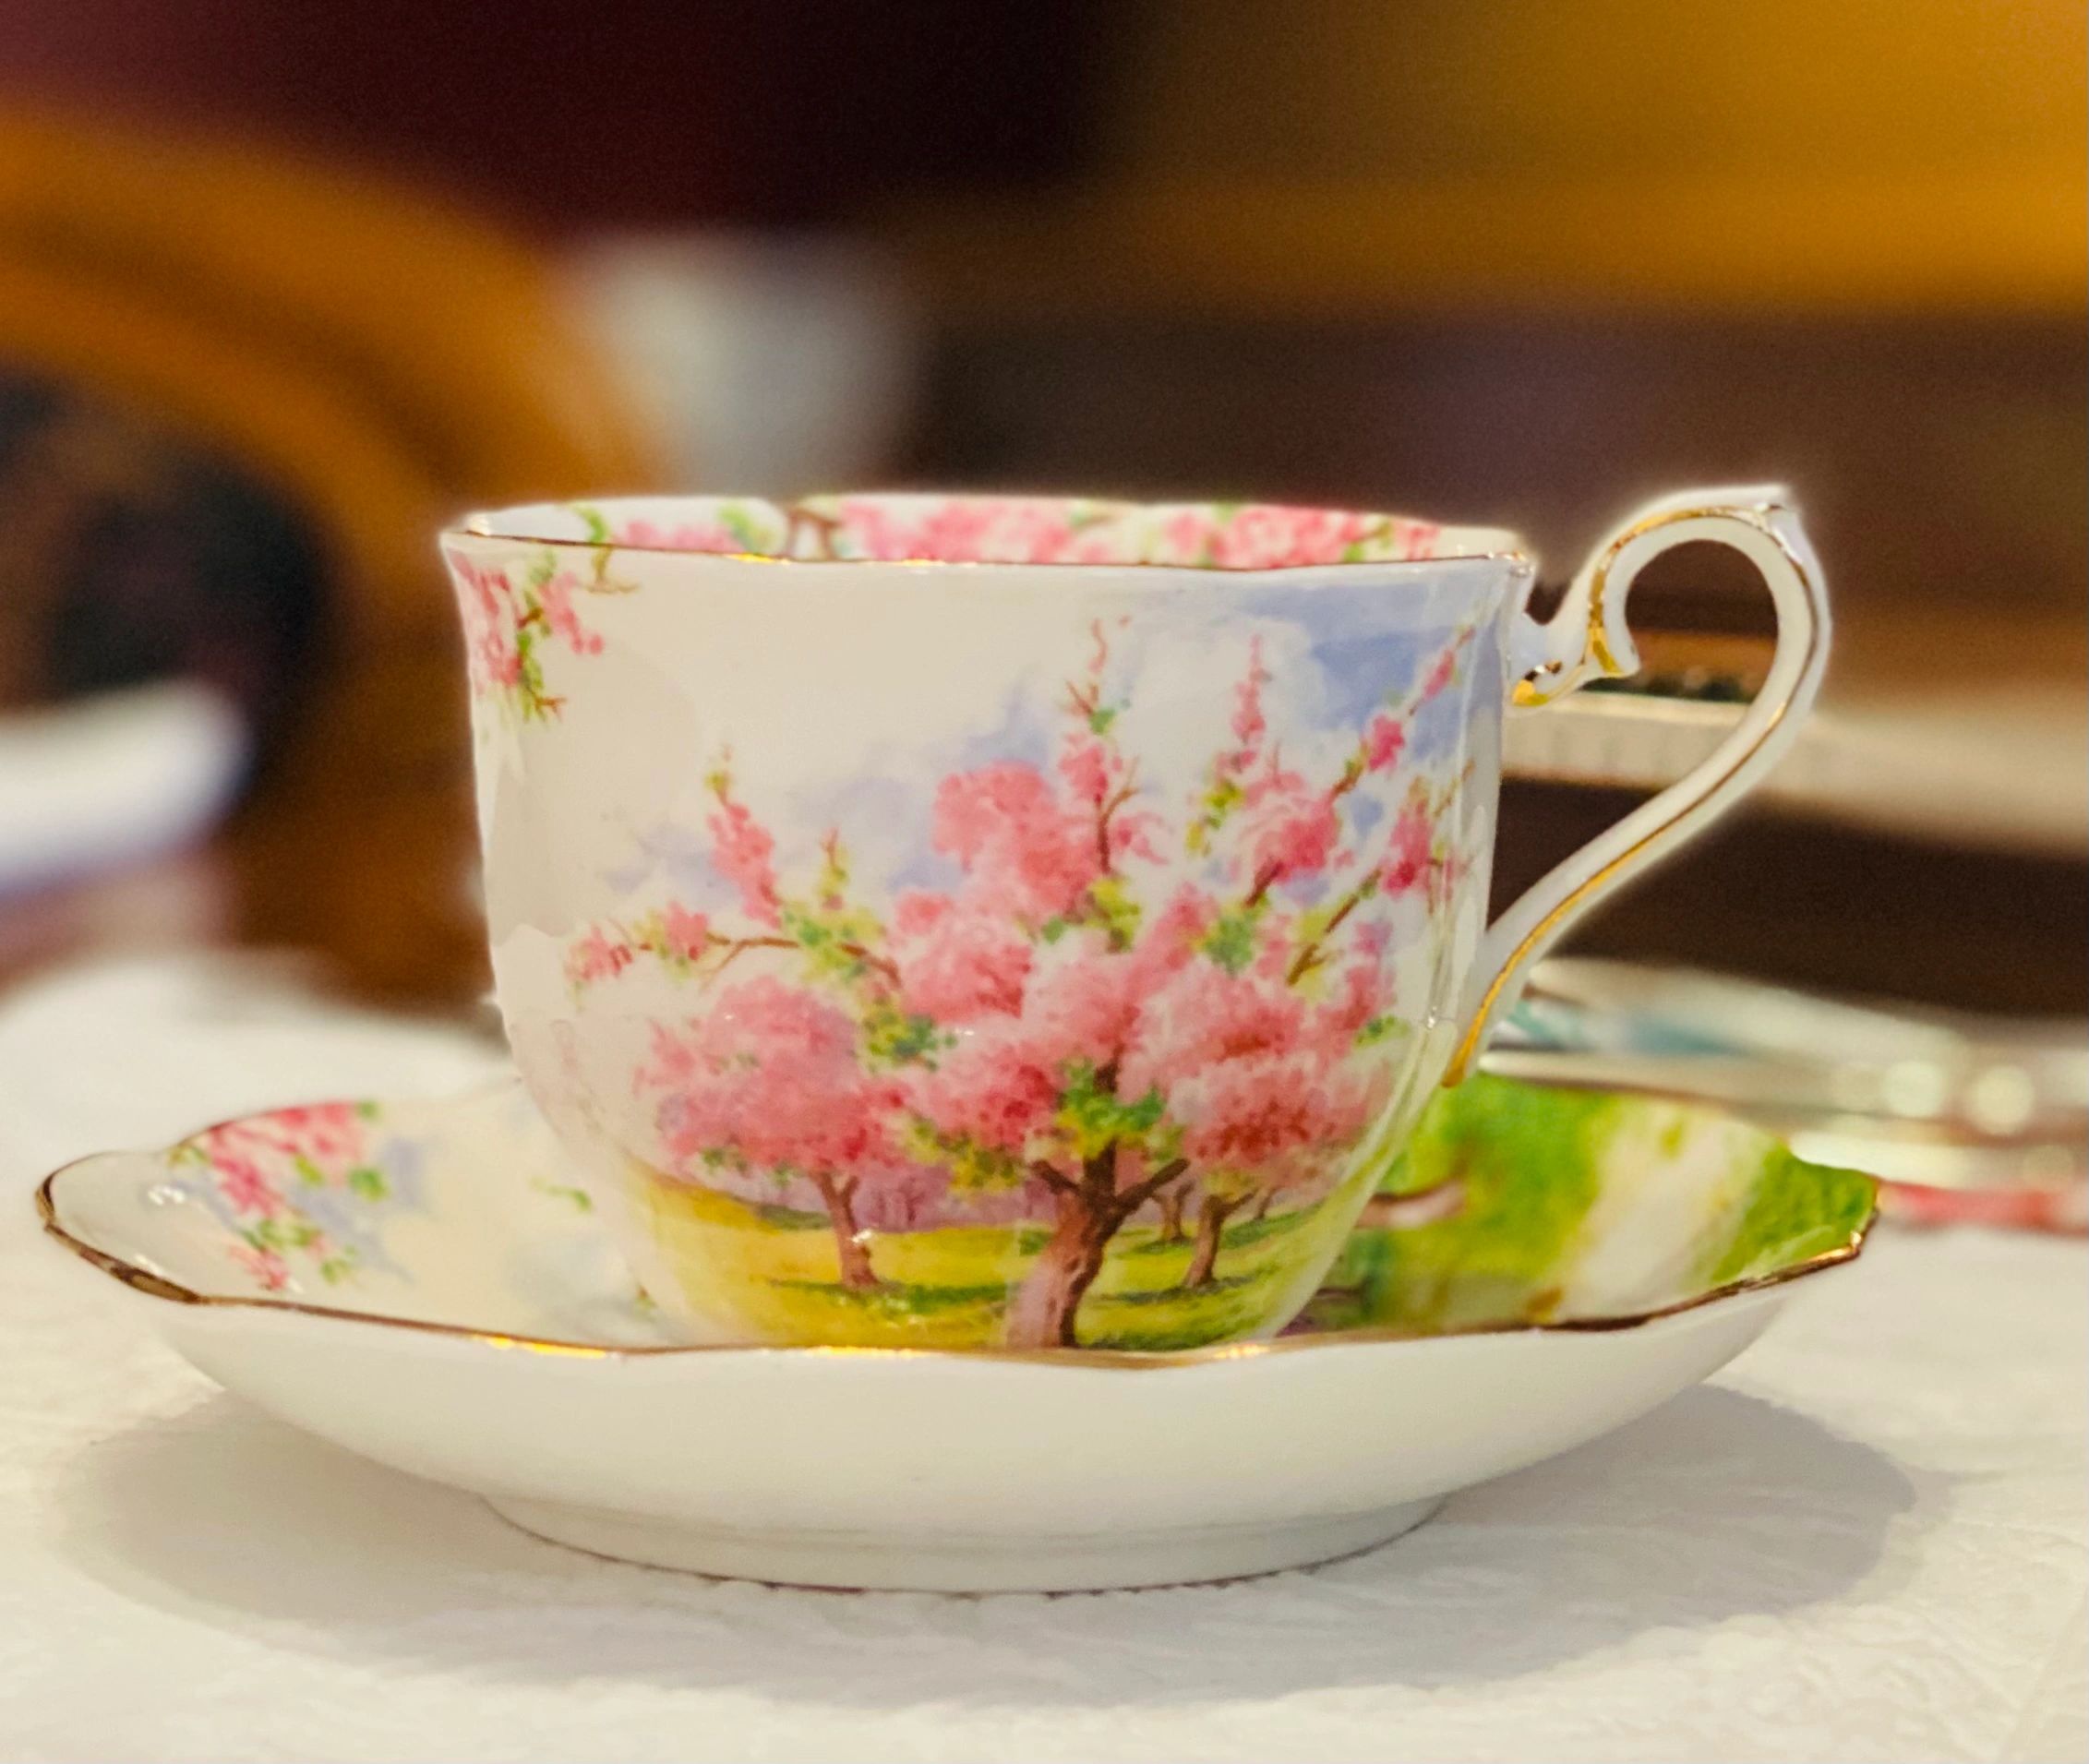 Blossom Time teacup and saucer at Princess and the Pea Hotel